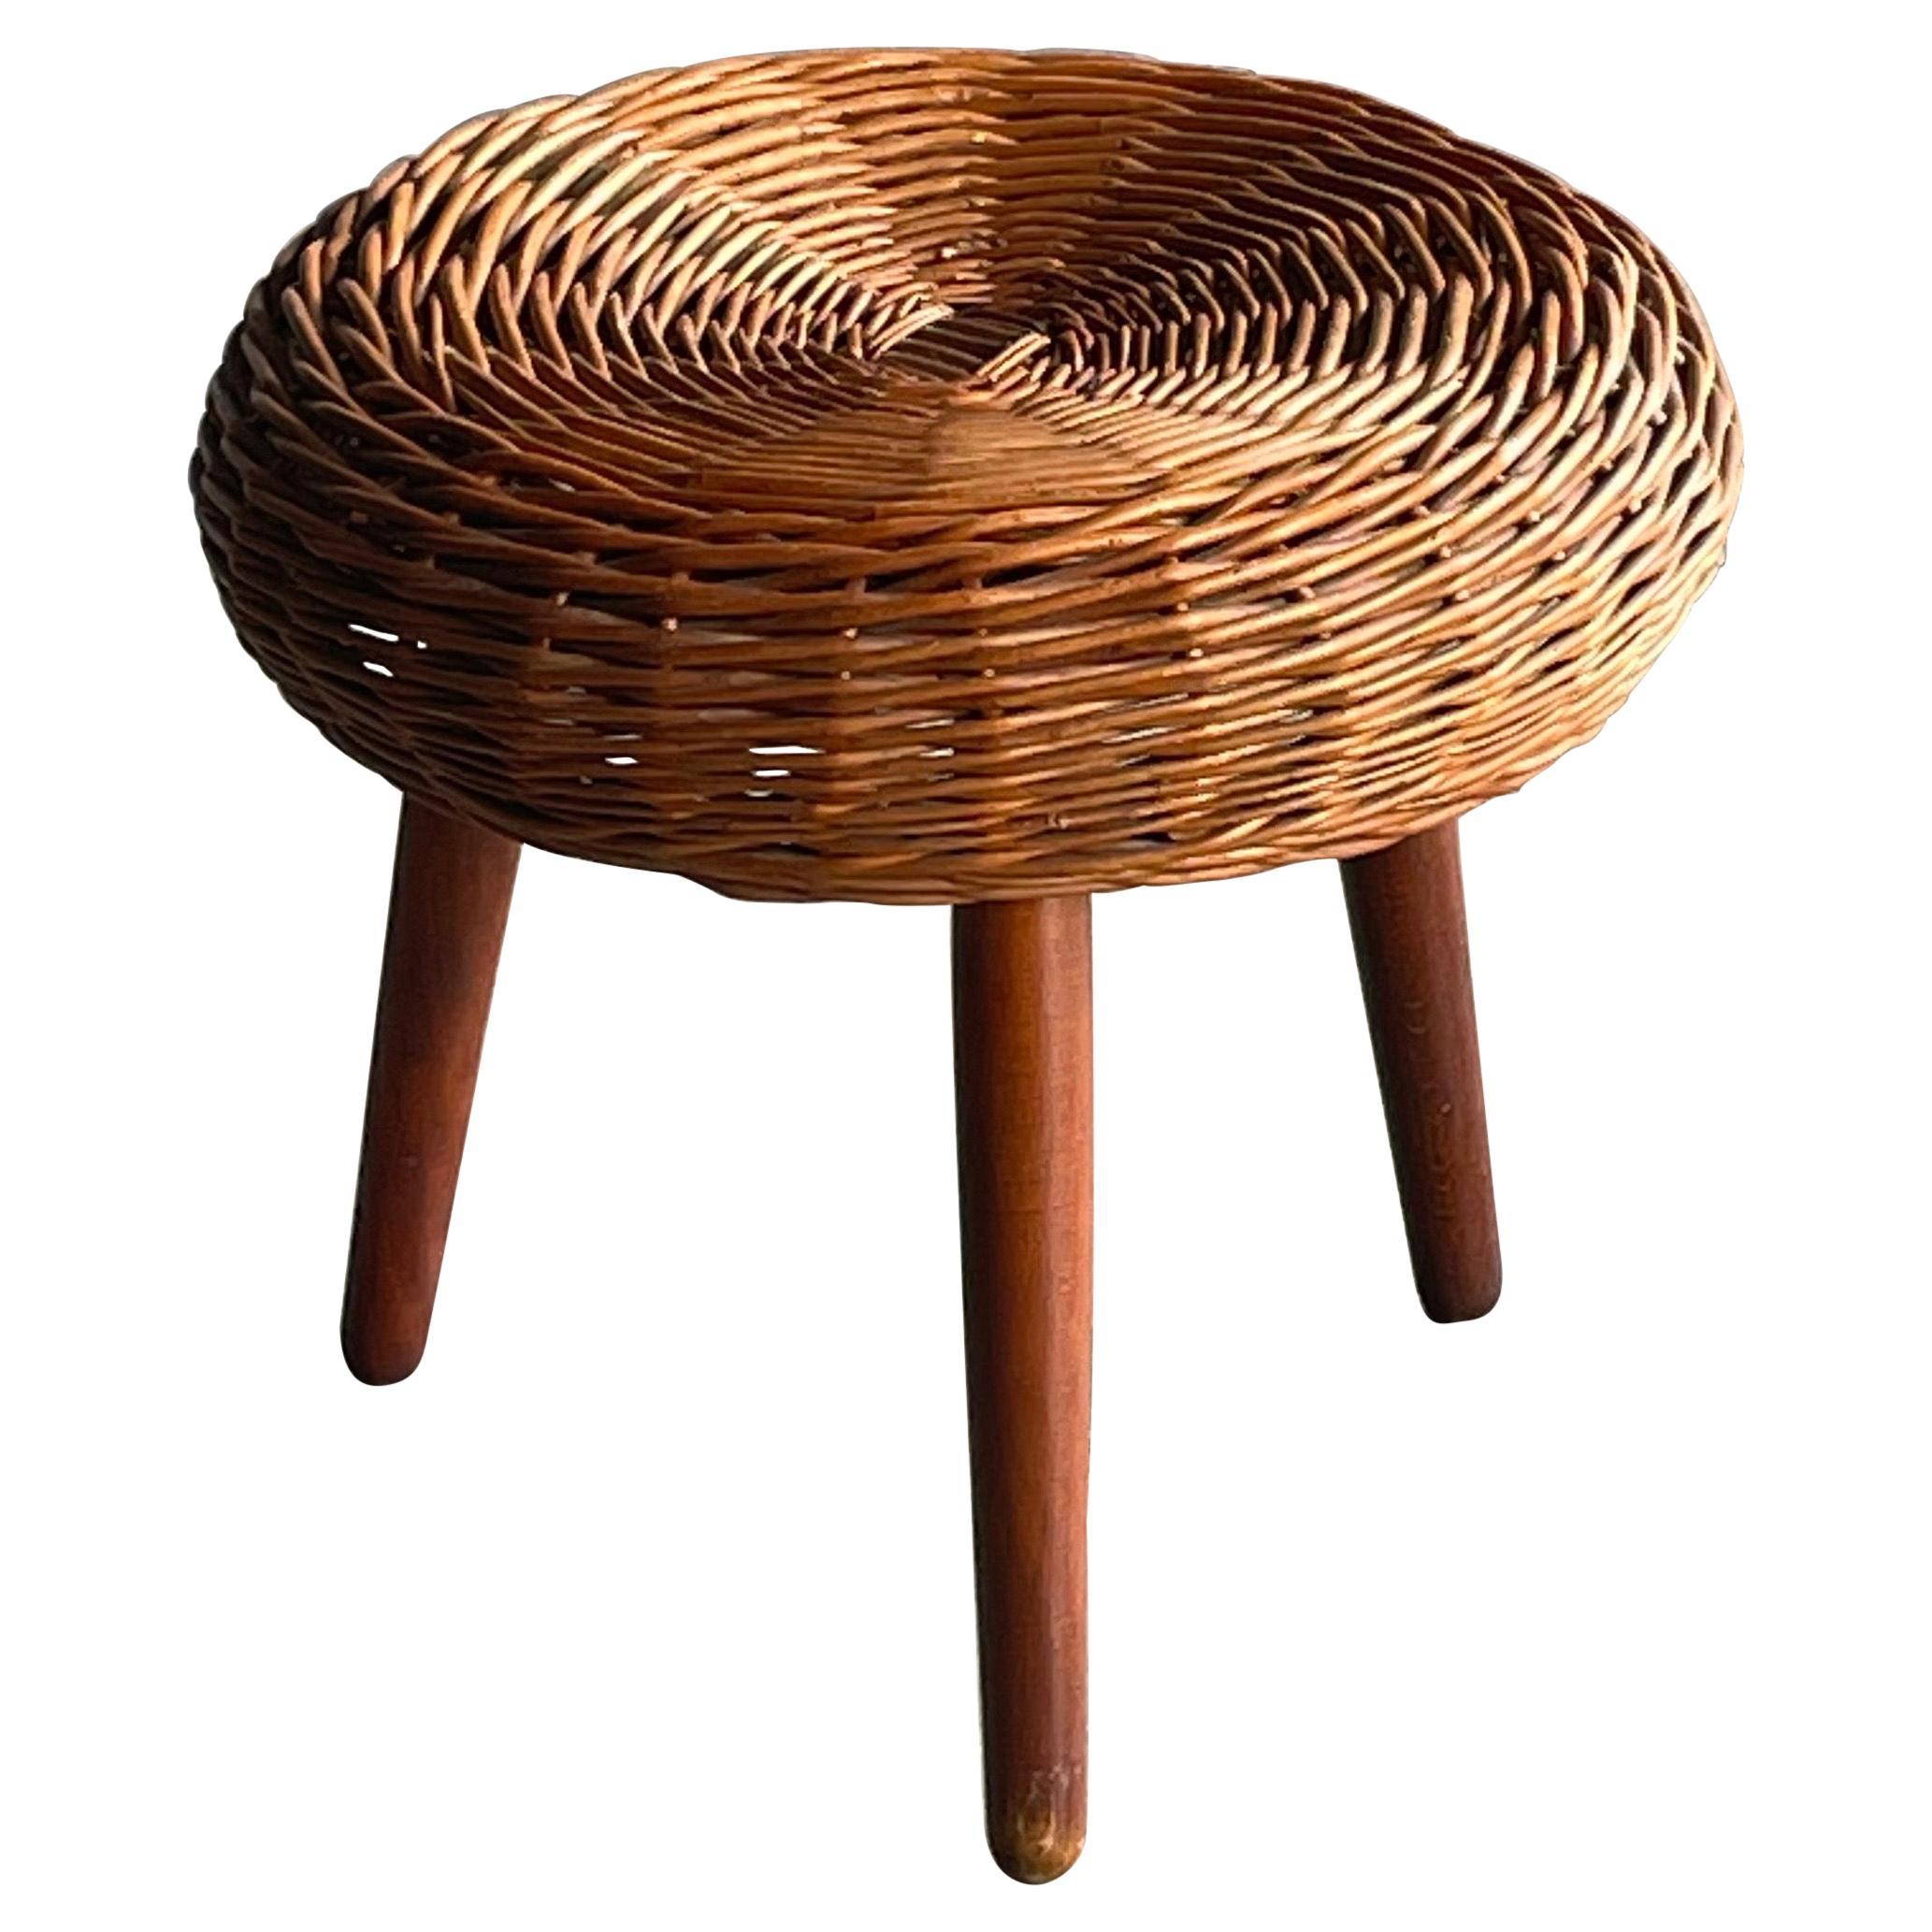 Tony Paul Attributed Tripod Stool or table, Rattan and Wood